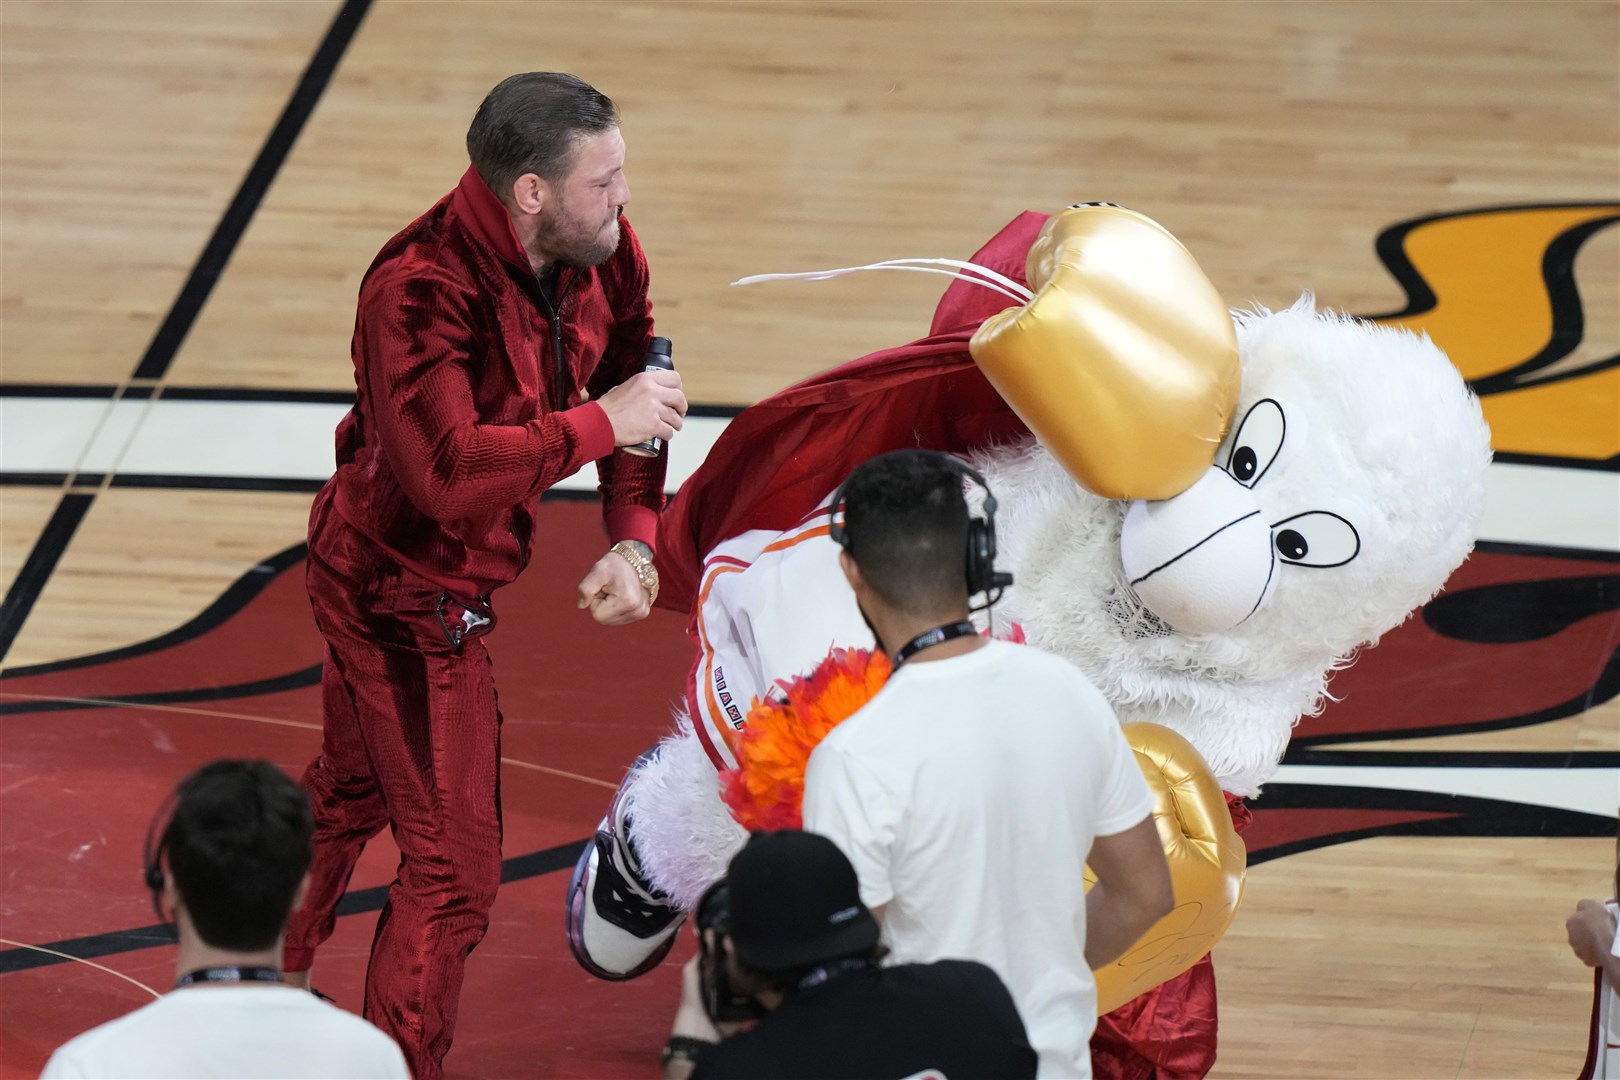 Conor McGregor punches Burnie, the Miami Heat mascot, during a publicity stunt in game four of the NBA Finals (Lynne Sladky/AP)